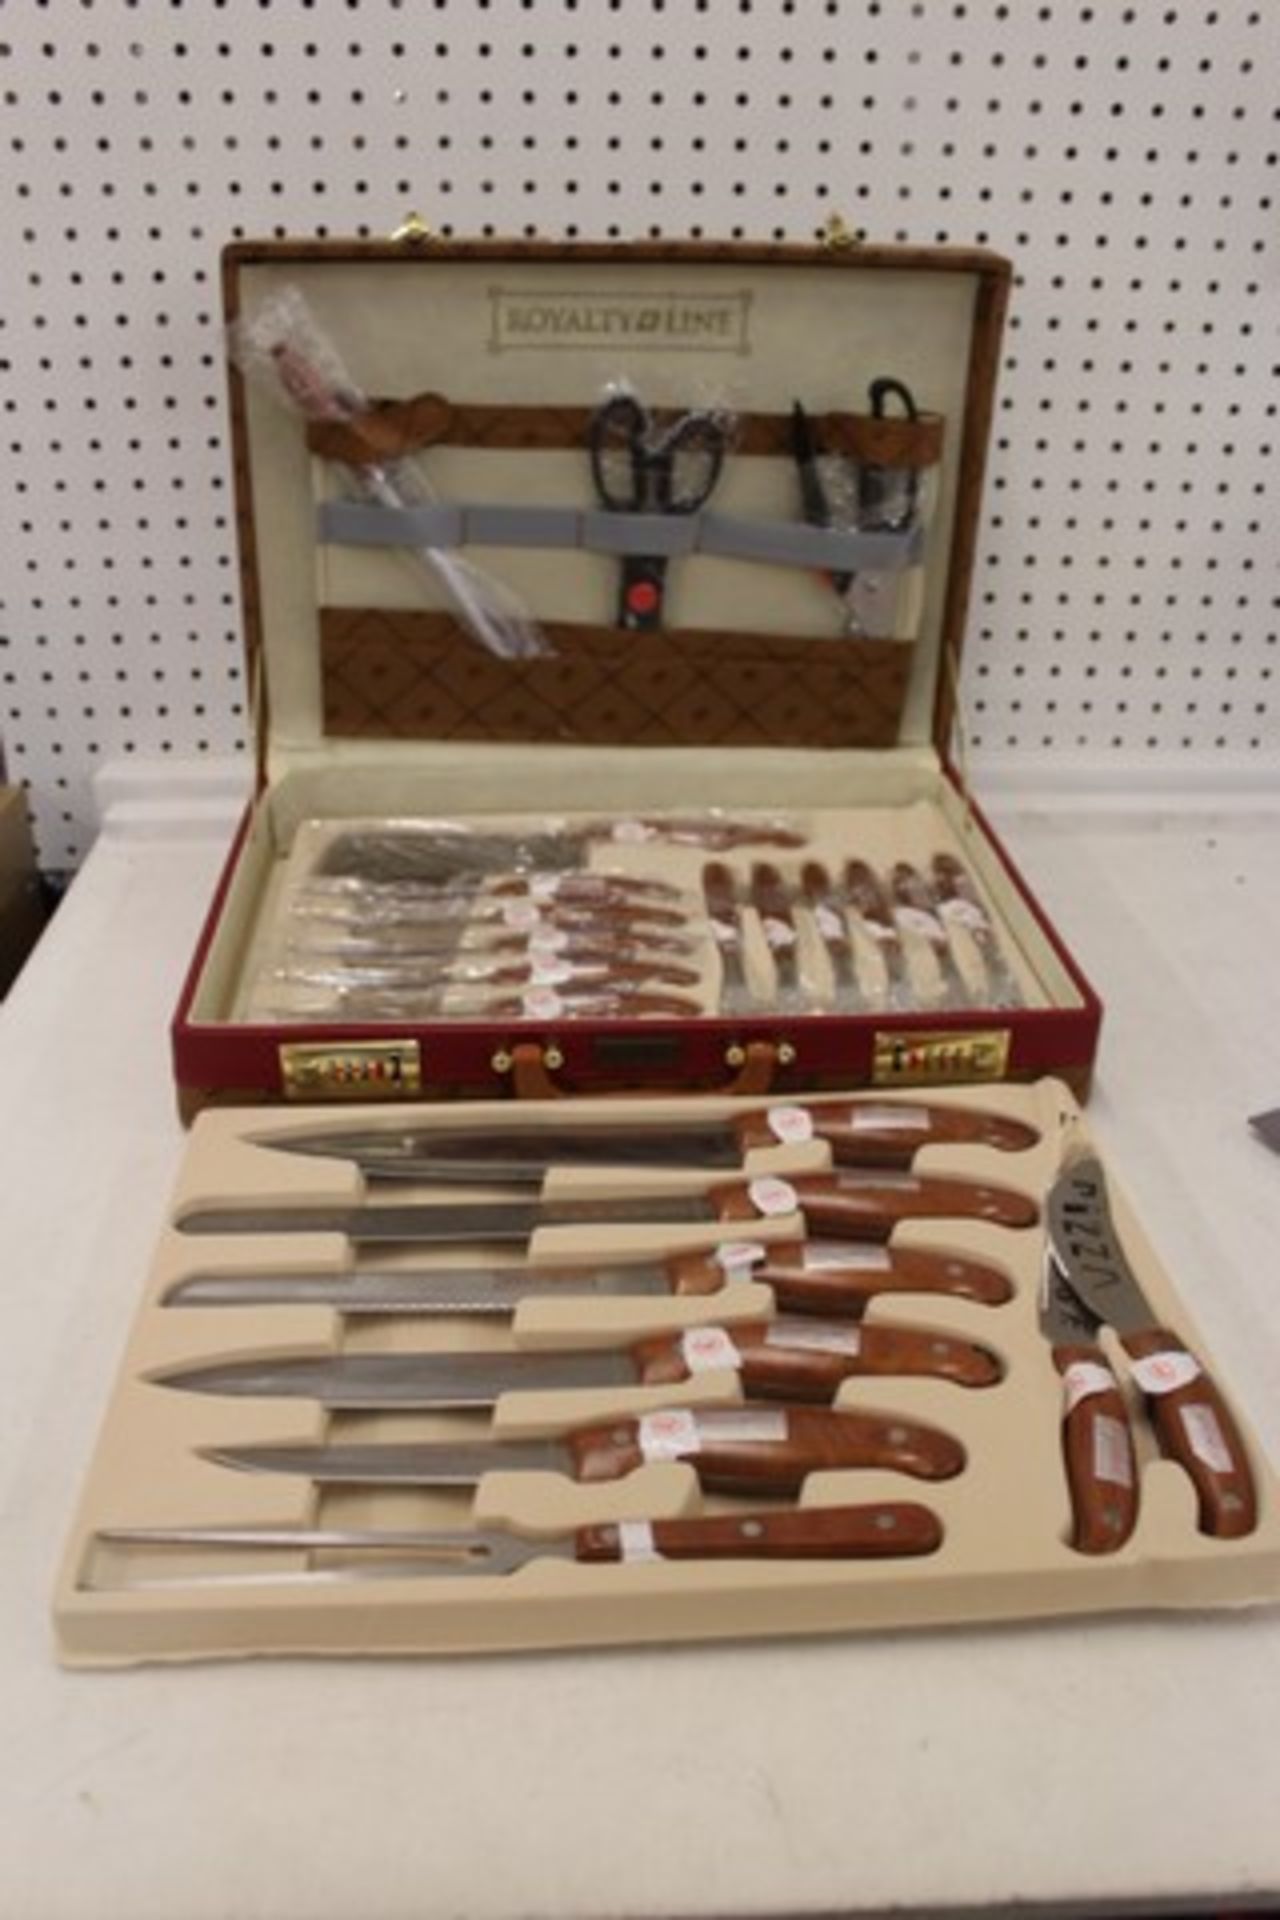 V Brand New 25pc Professional Chefs Knife & Cutlery Set in Leather pu case - Includes Chopper-